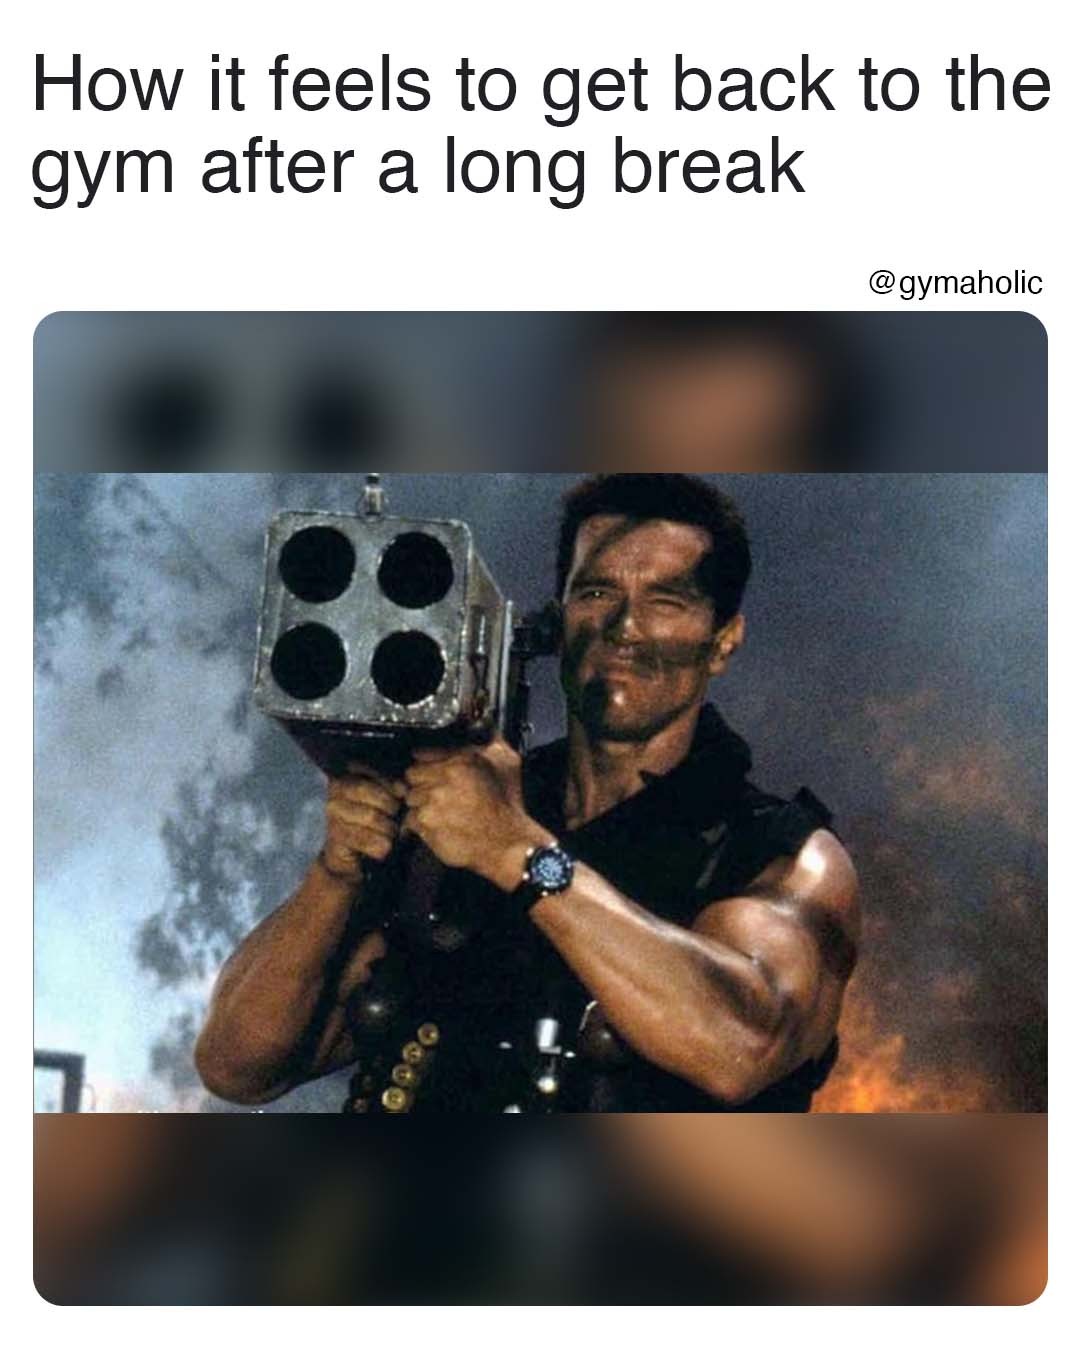 How it feels to get back to the gym after a long break